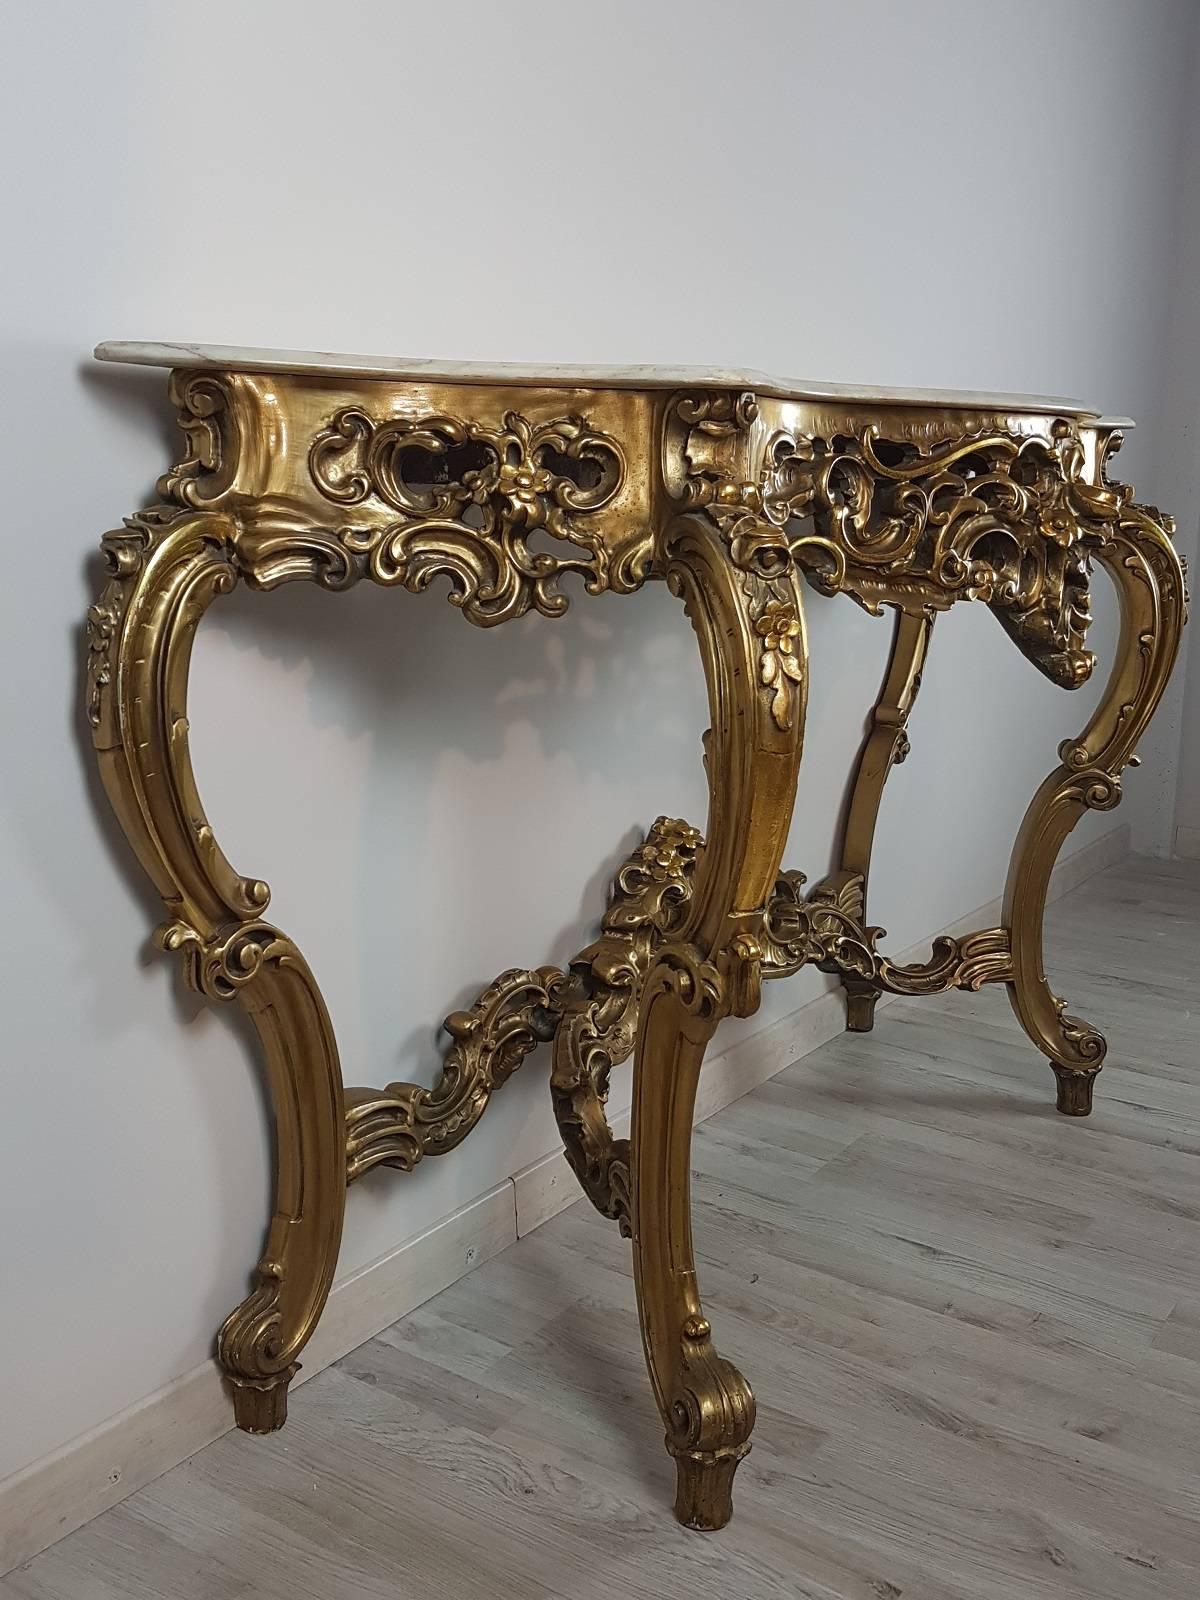 Baroque Revival 20th Century Italian Baroque Style Carved and Gilded Wood Console Table